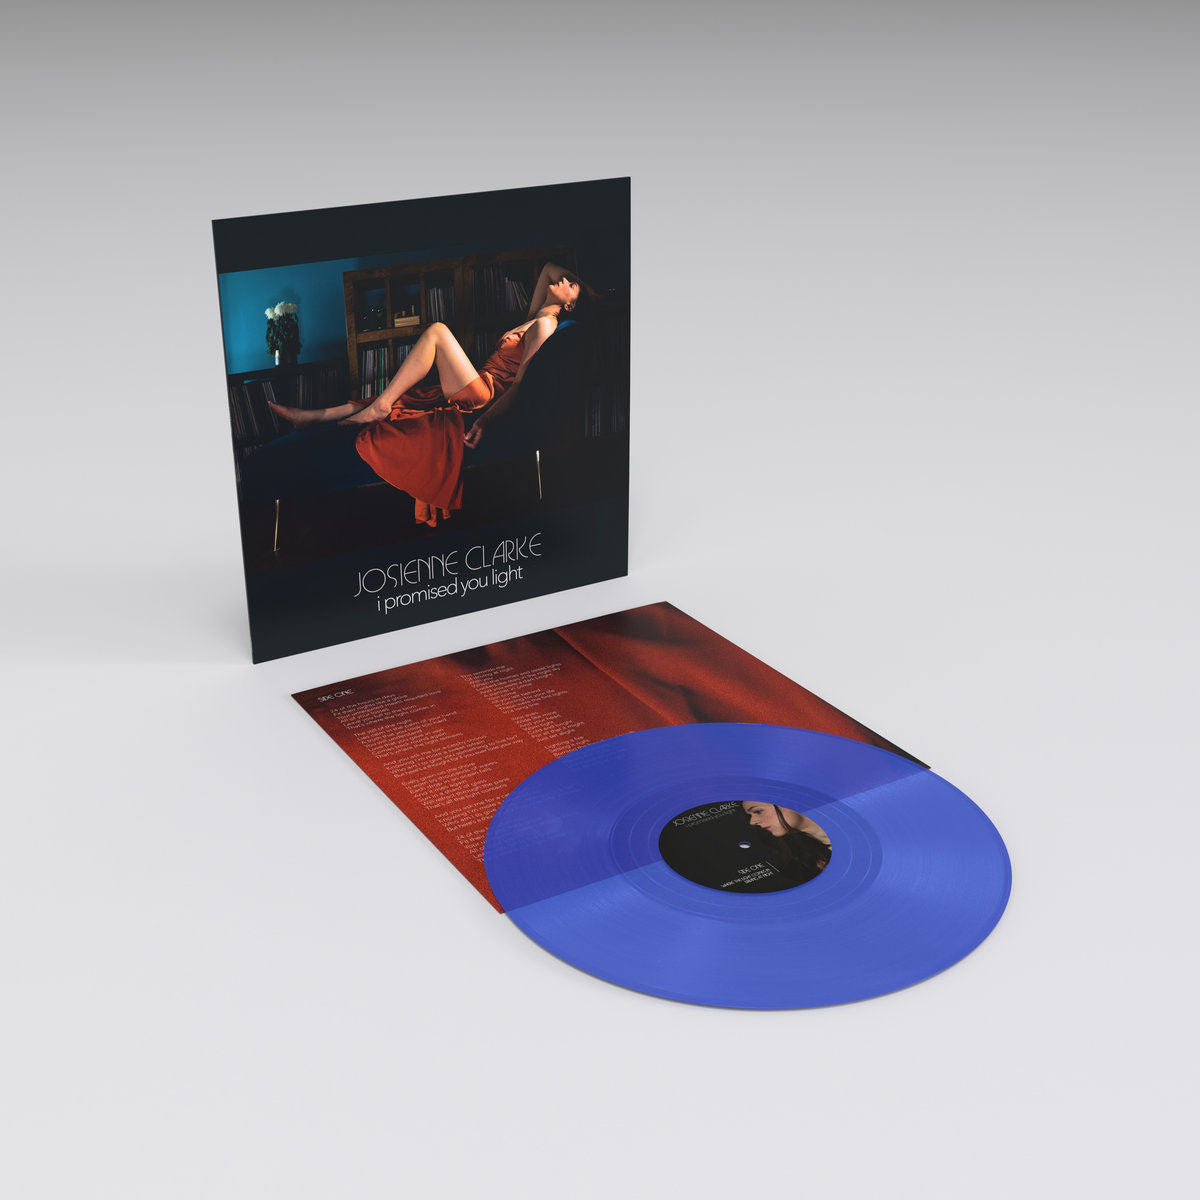 I Promised You Light: Limited Edition Midnight Blue Vinyl LP”